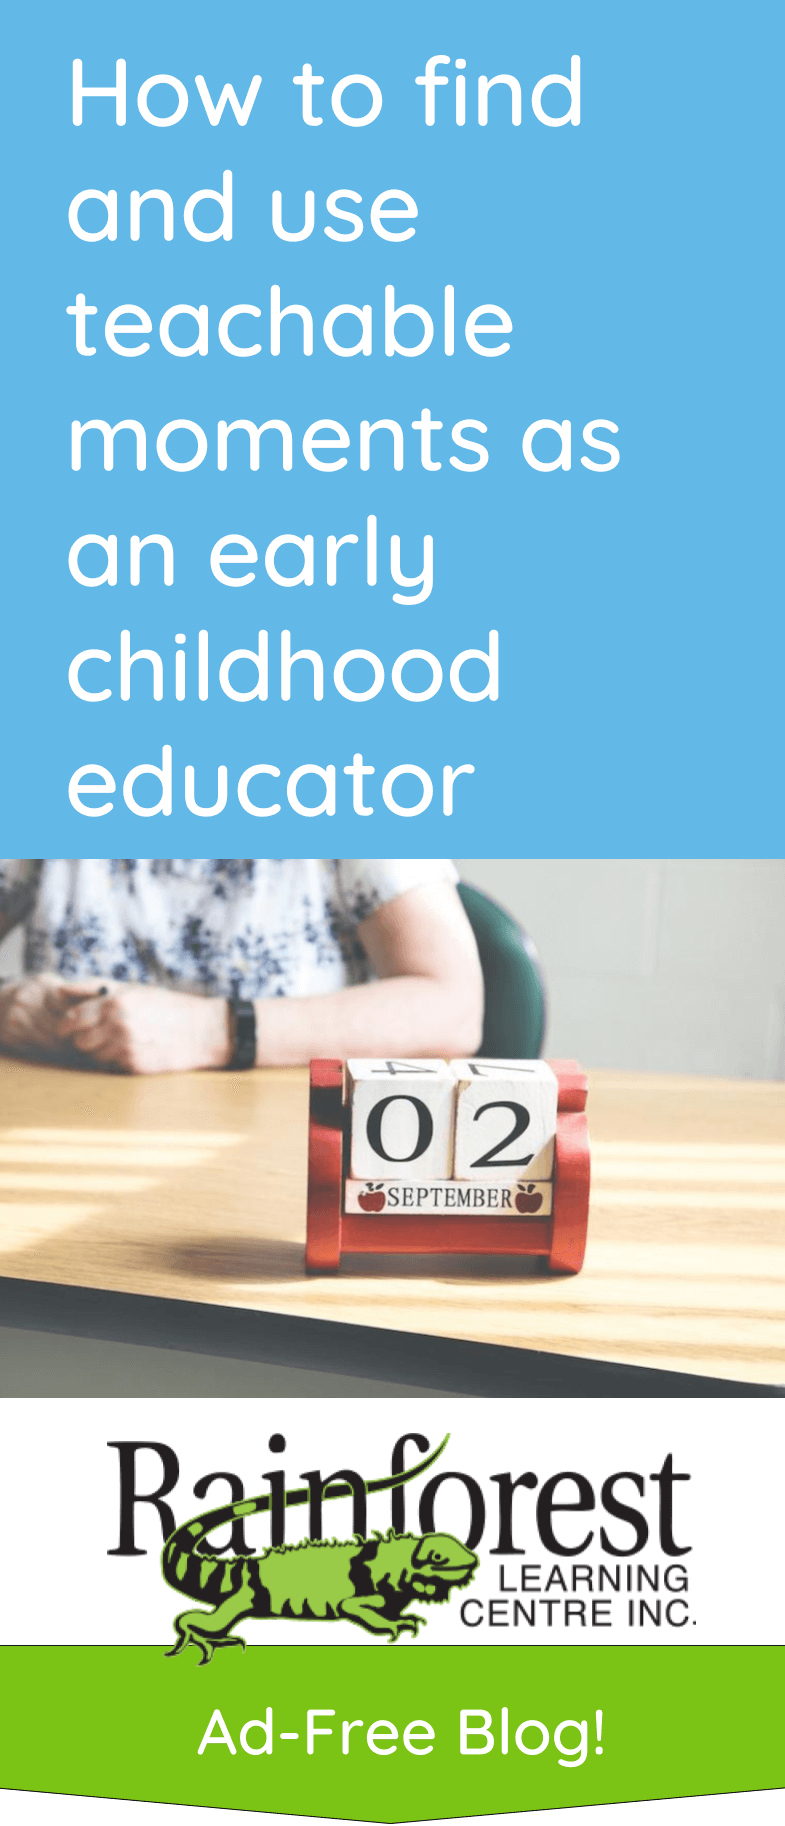 How to find and use teachable moments as an early childhood educator article - pinterest image